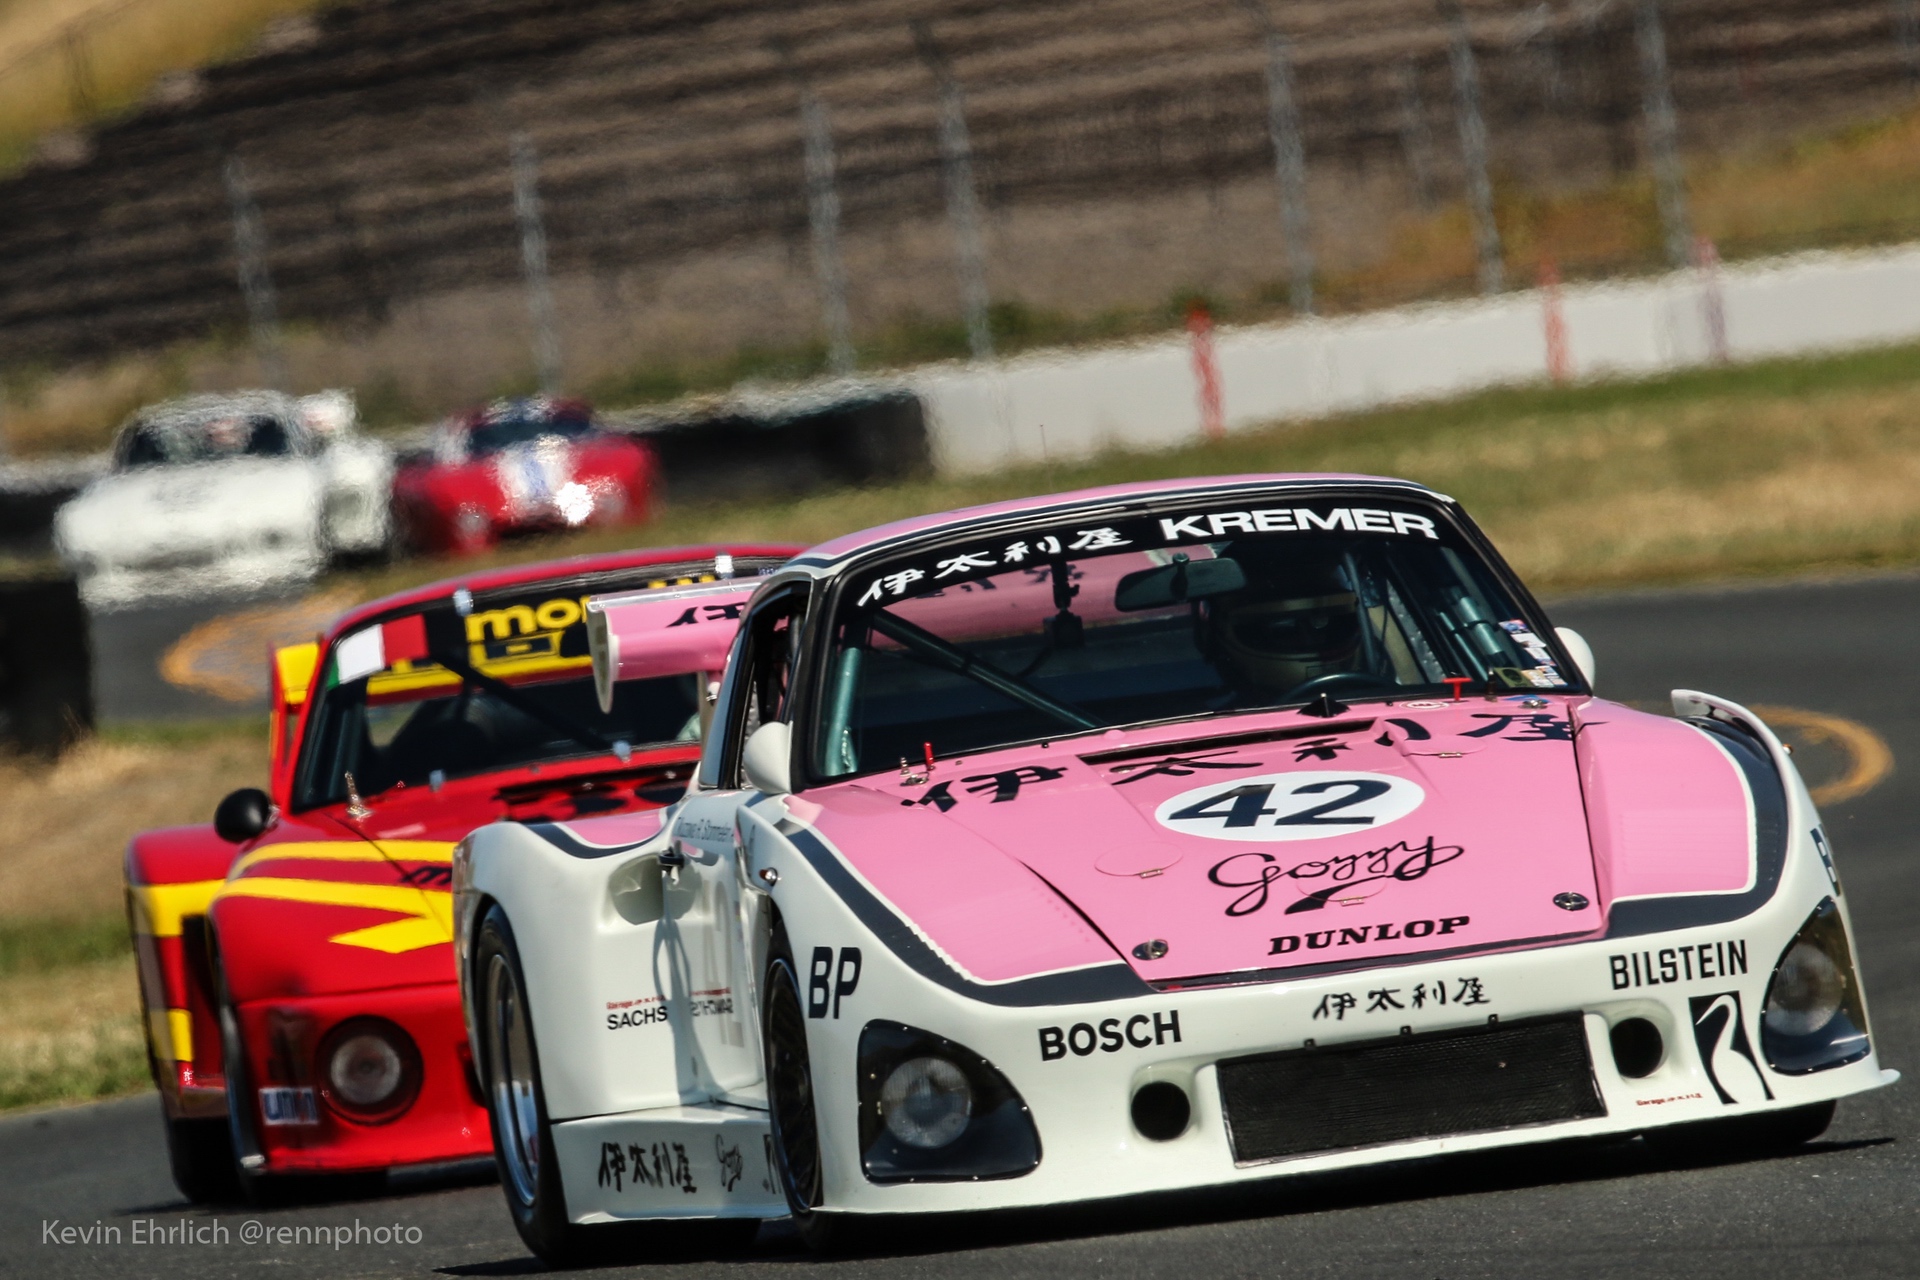 Porsche 935/78 on race track ahead of red and yellow car